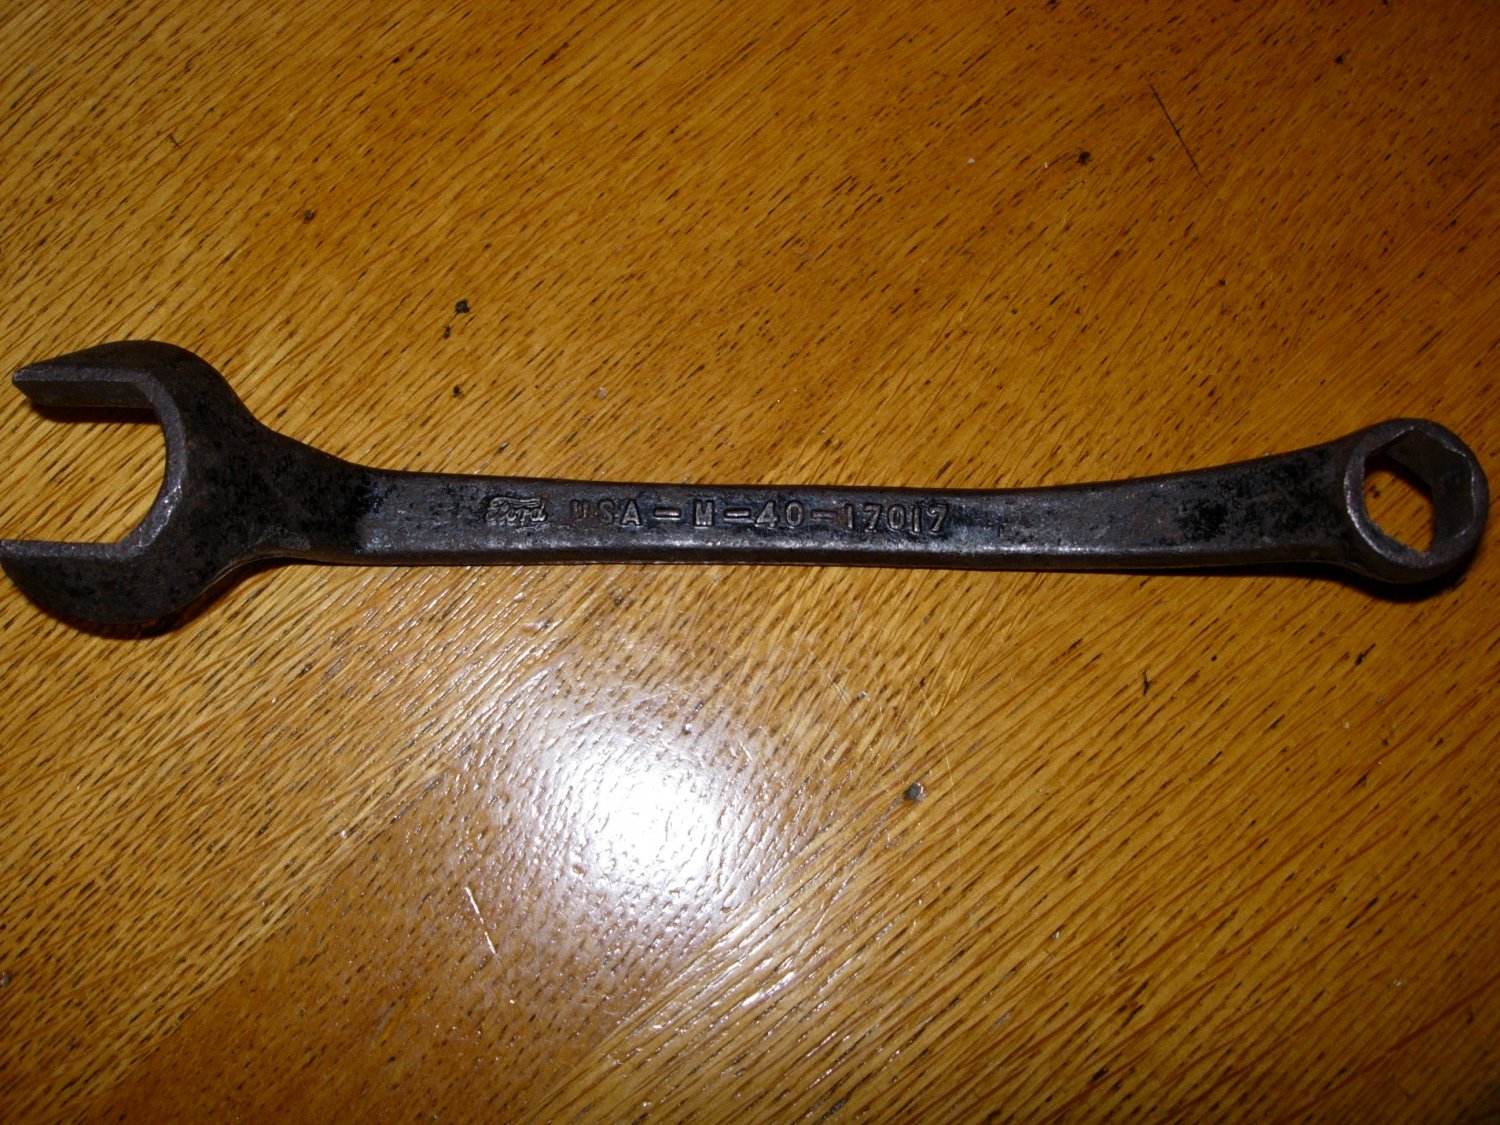 Vintage Ford M-40-17017 Wrench with Ford Logo